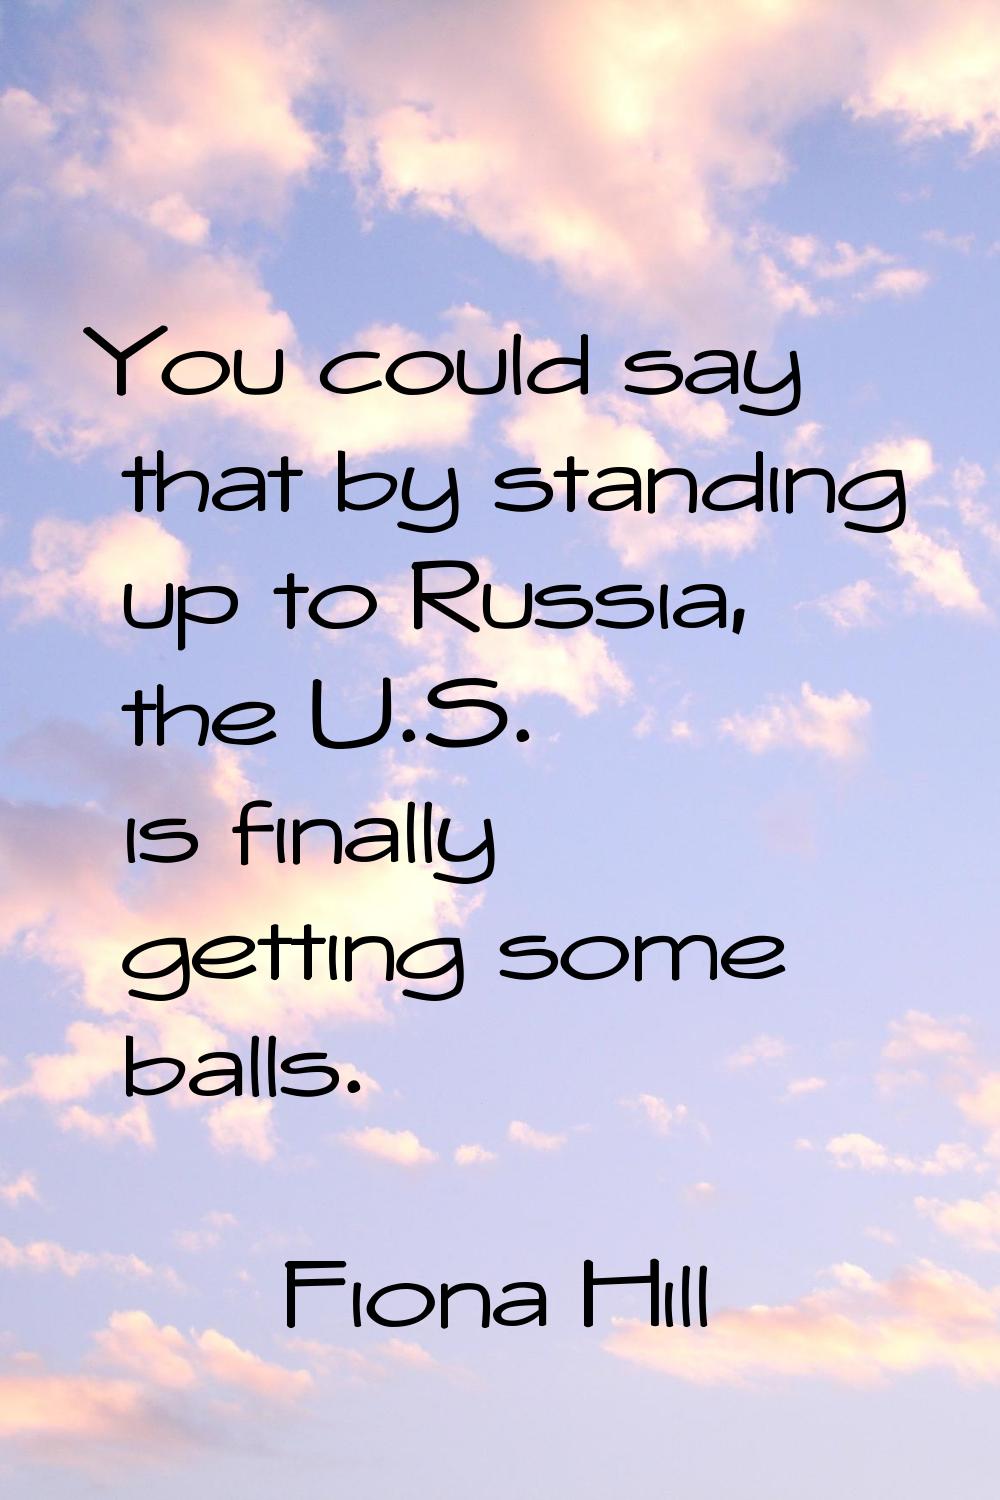 You could say that by standing up to Russia, the U.S. is finally getting some balls.